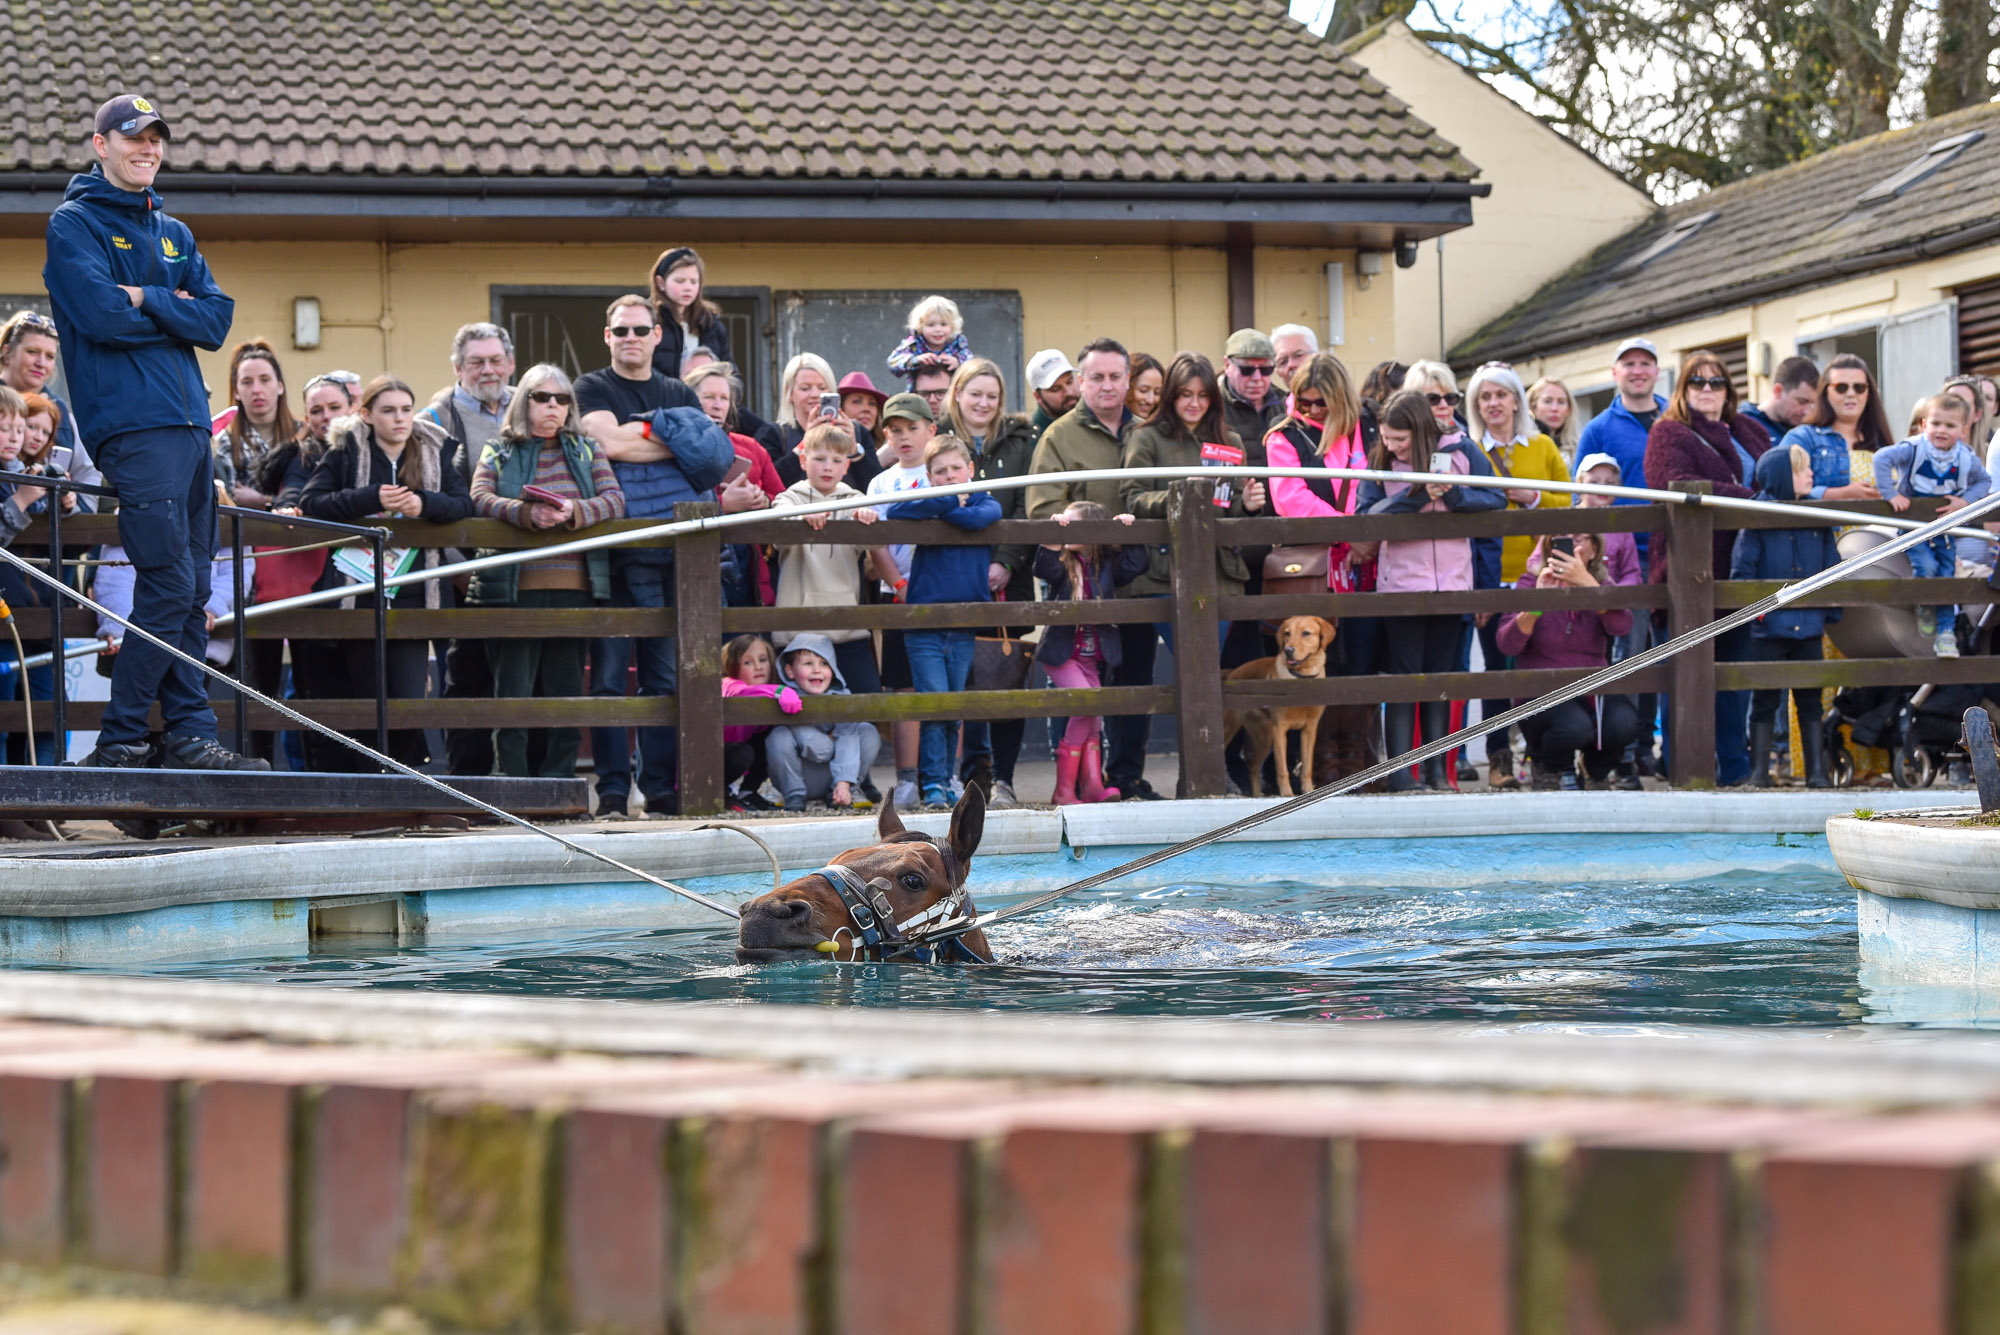 A horse in a pool at Middleham Open Day